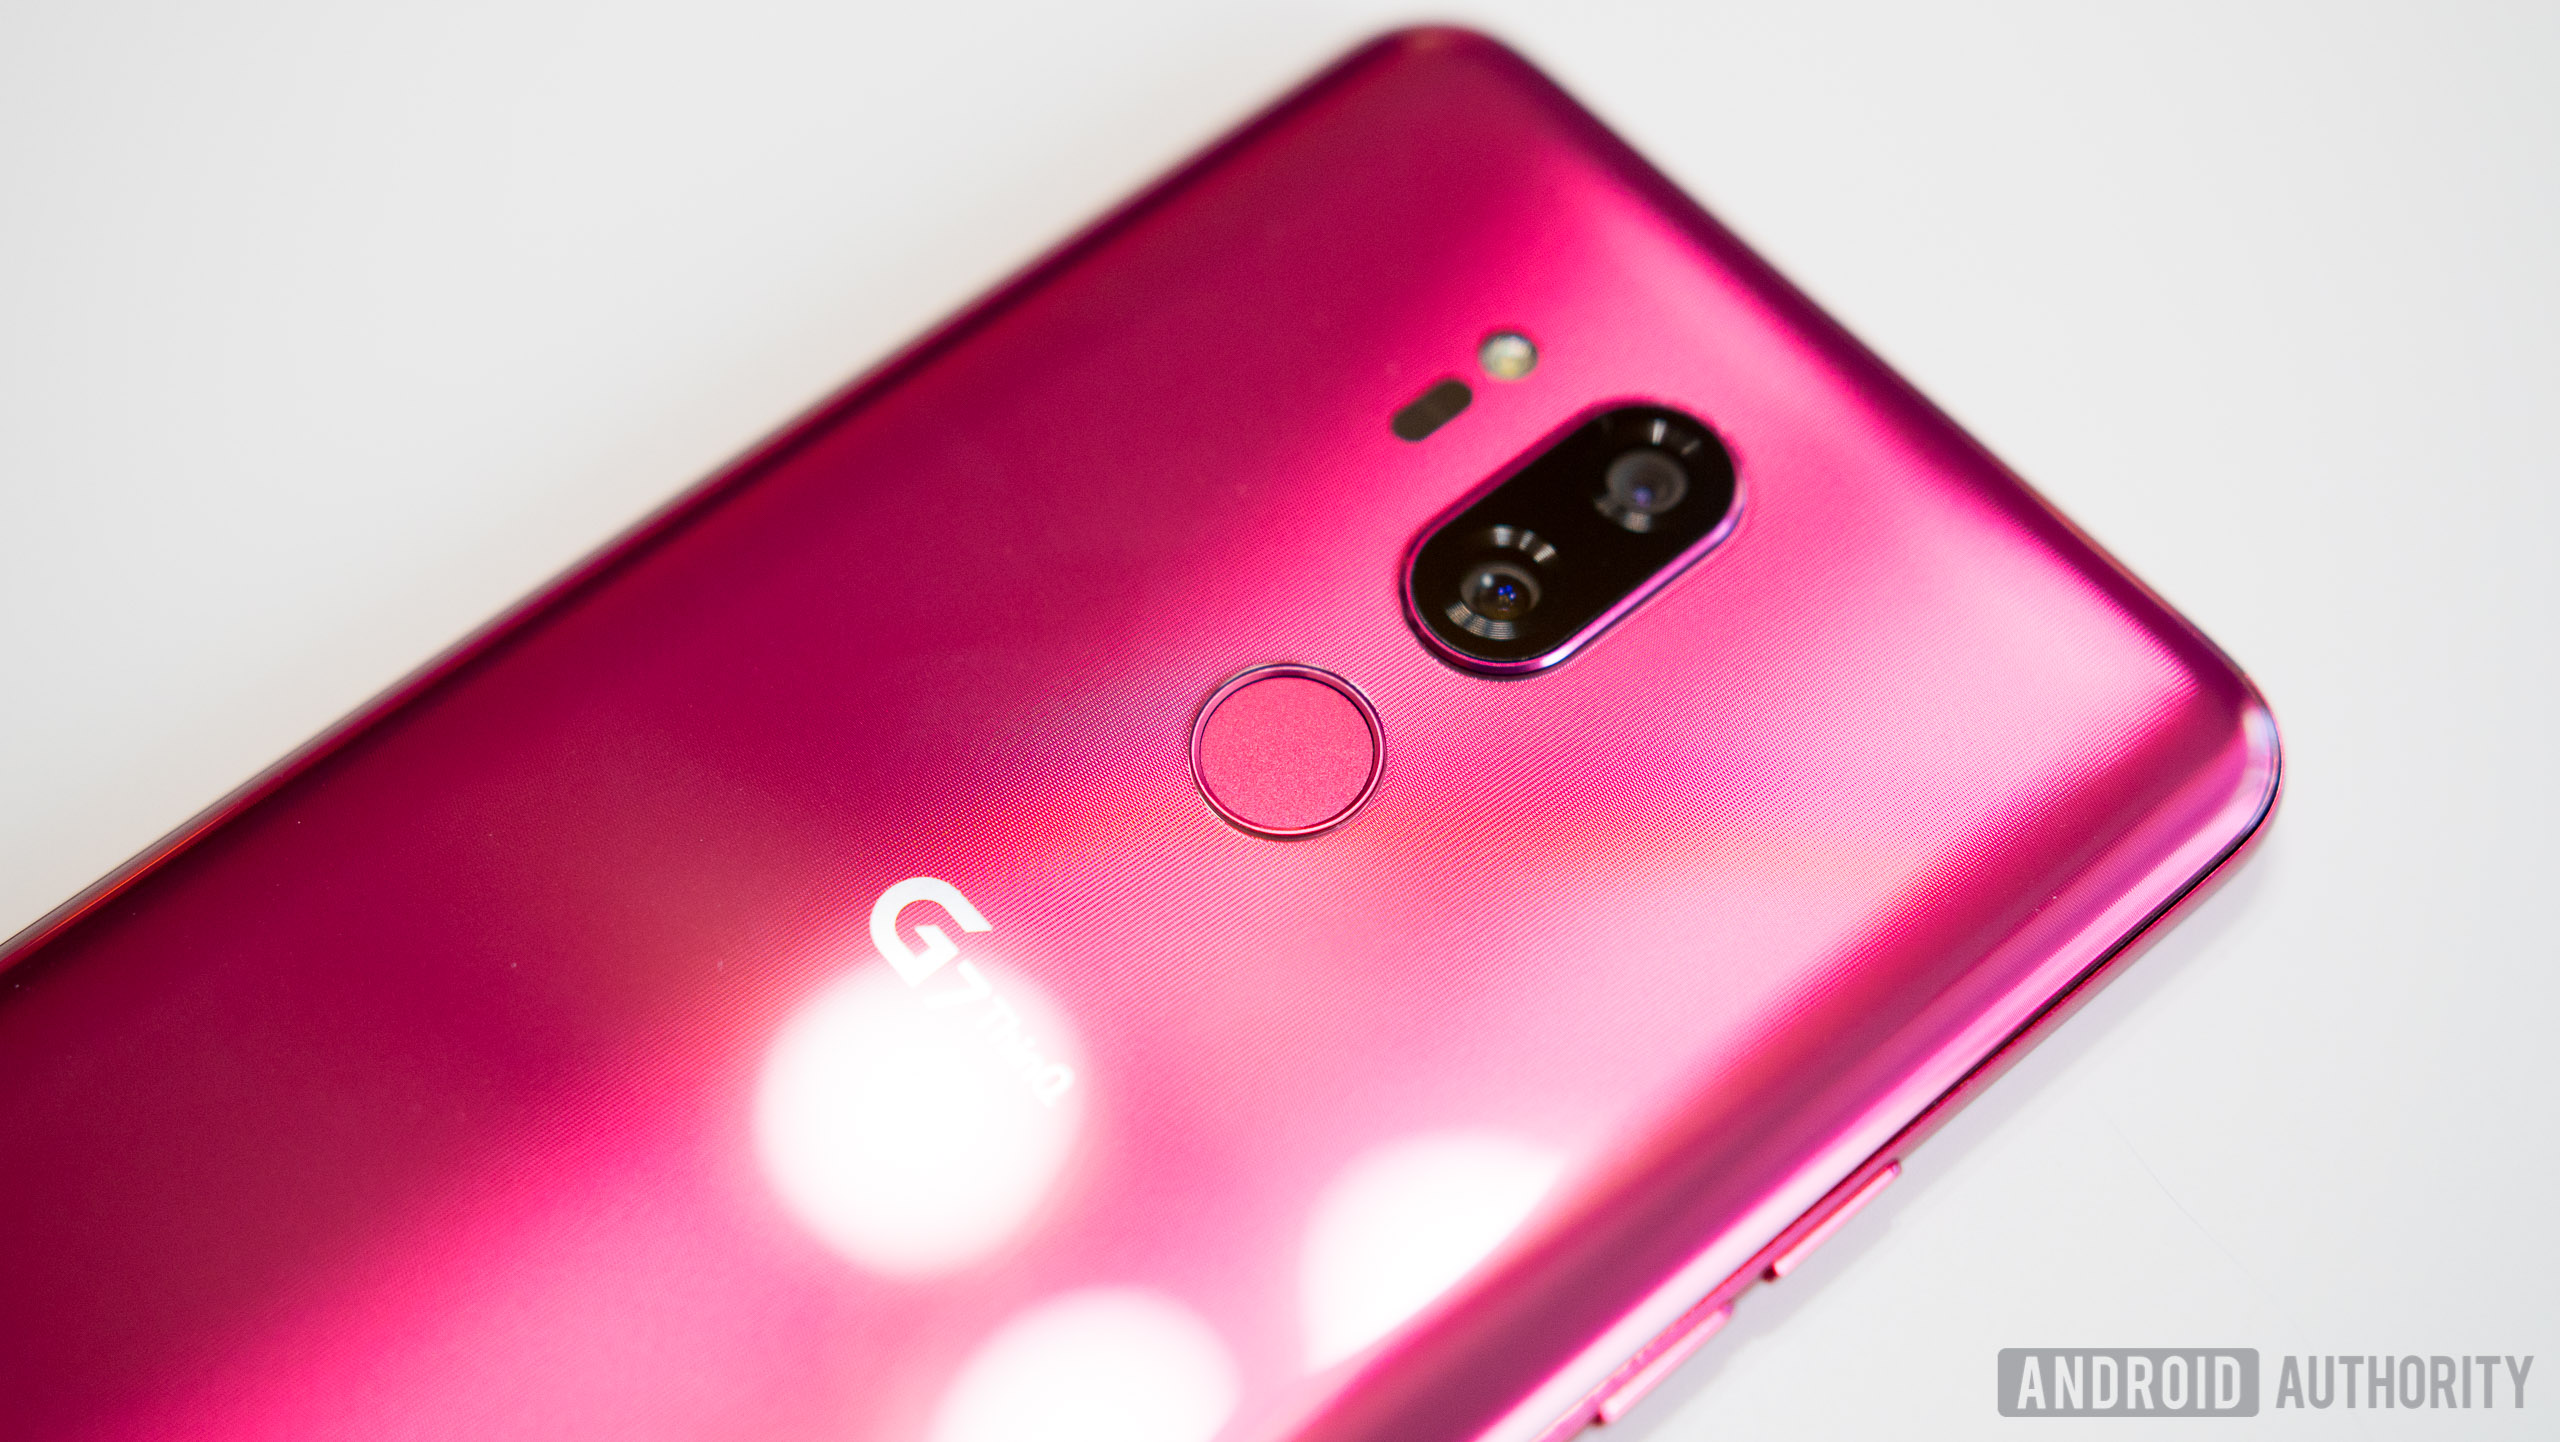 LG G7 problems - problems where the only option is to wait for an official update